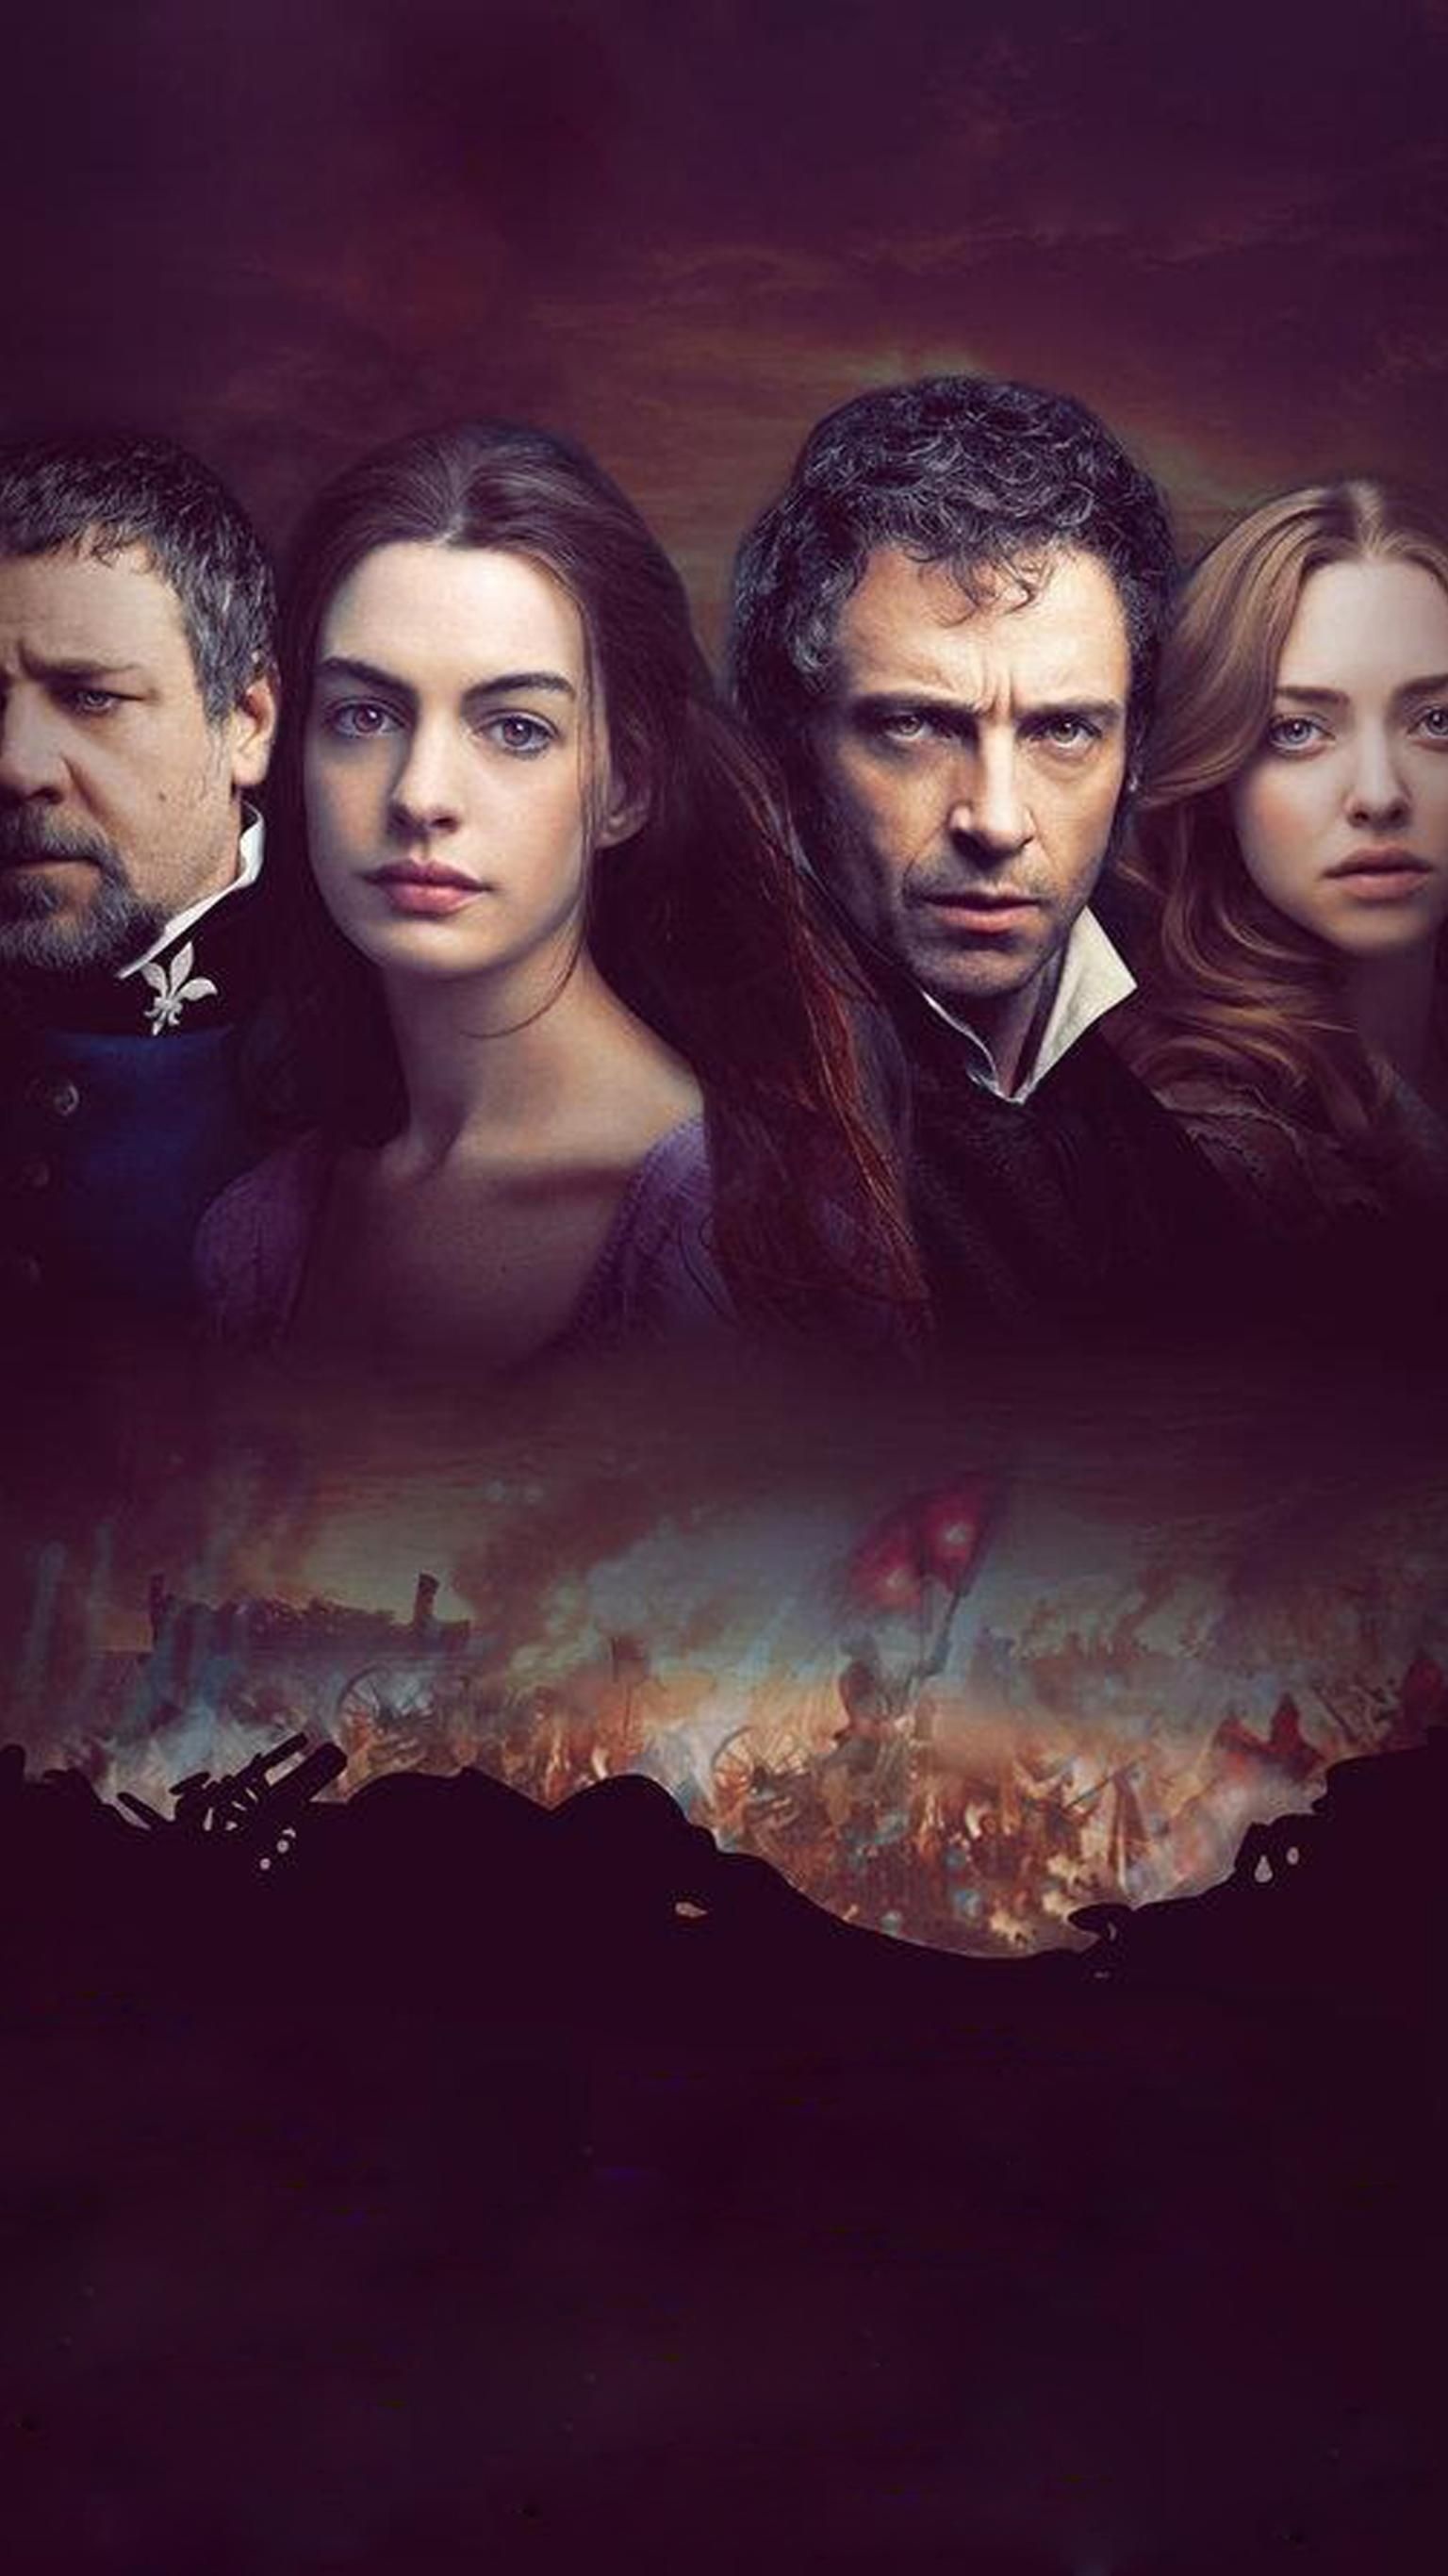 Les Miserables: Adapted from the 1862 French novel of the same name by Victor Hugo. 1540x2740 HD Wallpaper.